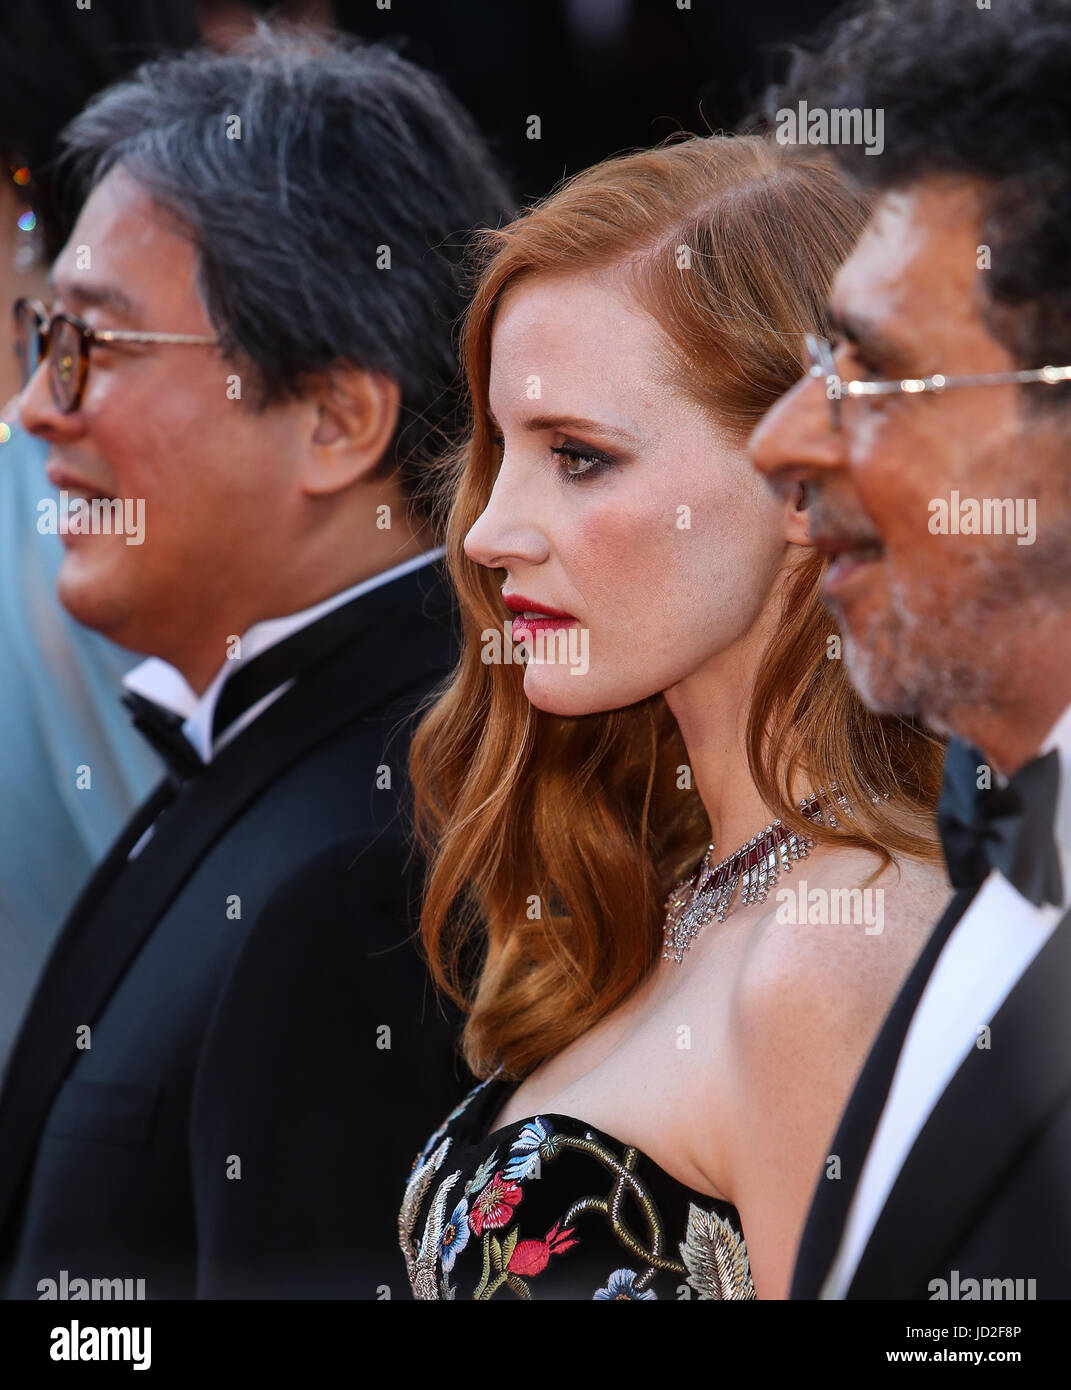 70th Cannes Film Festival - Gala Opening - 'Ismael's Ghosts' red carpet  Featuring: Park Chan-Wook, Jessica Chastain, Gabriel Yared Where: Cannes, France When: 17 May 2017 Credit: WENN.com Stock Photo